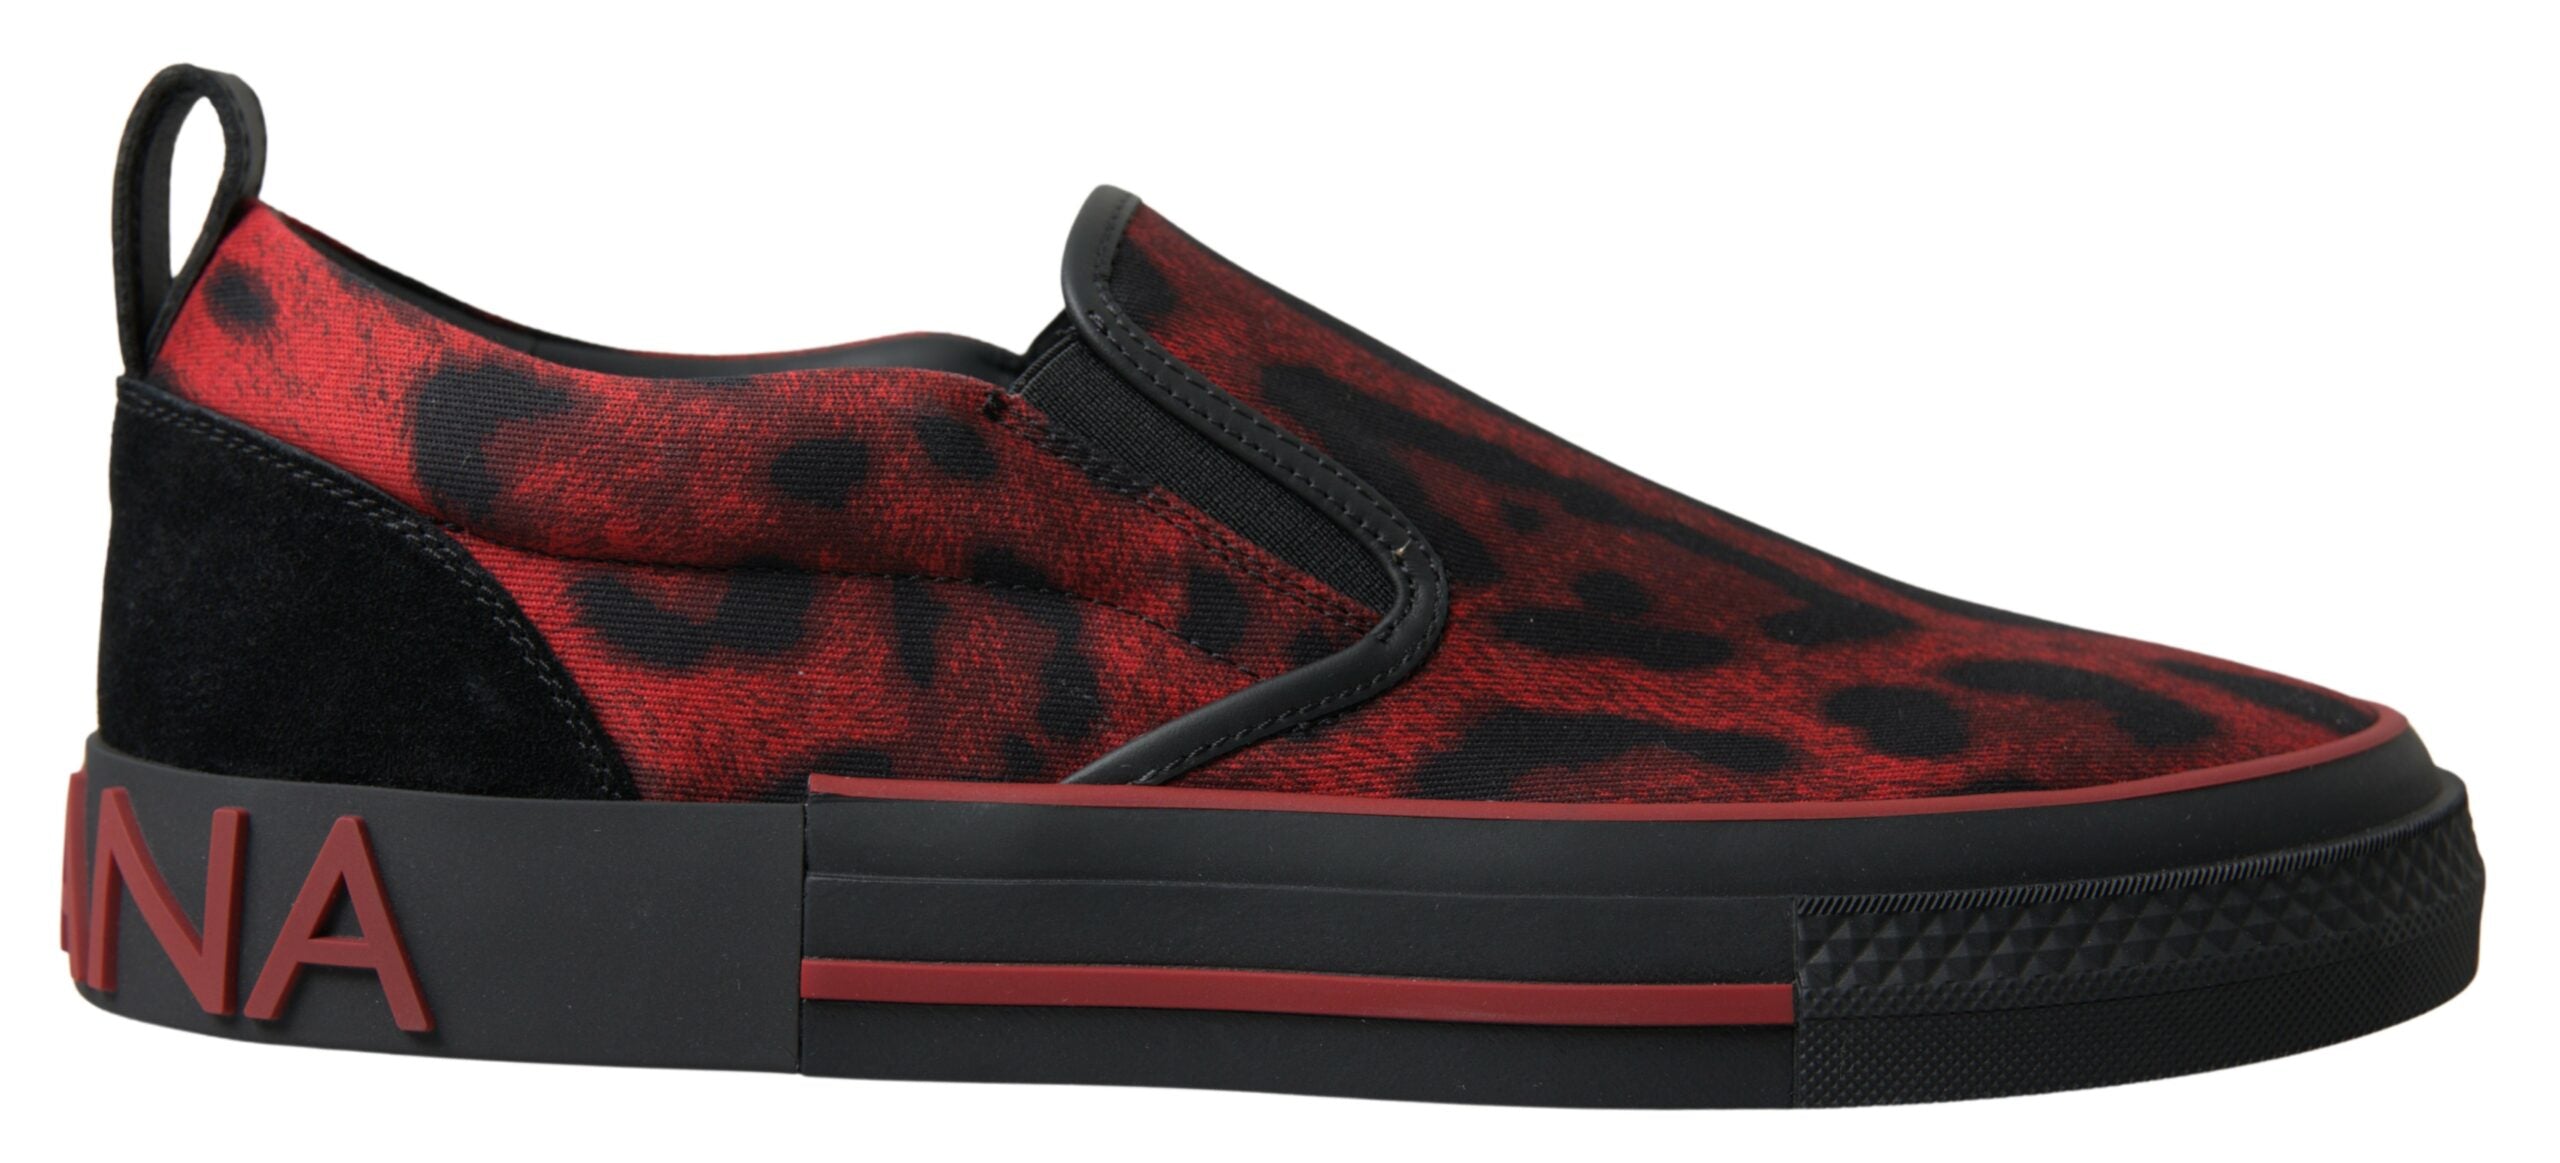 Dolce & Gabbana Red Black Leopard Loafers Sneakers Shoes - EU39/US6